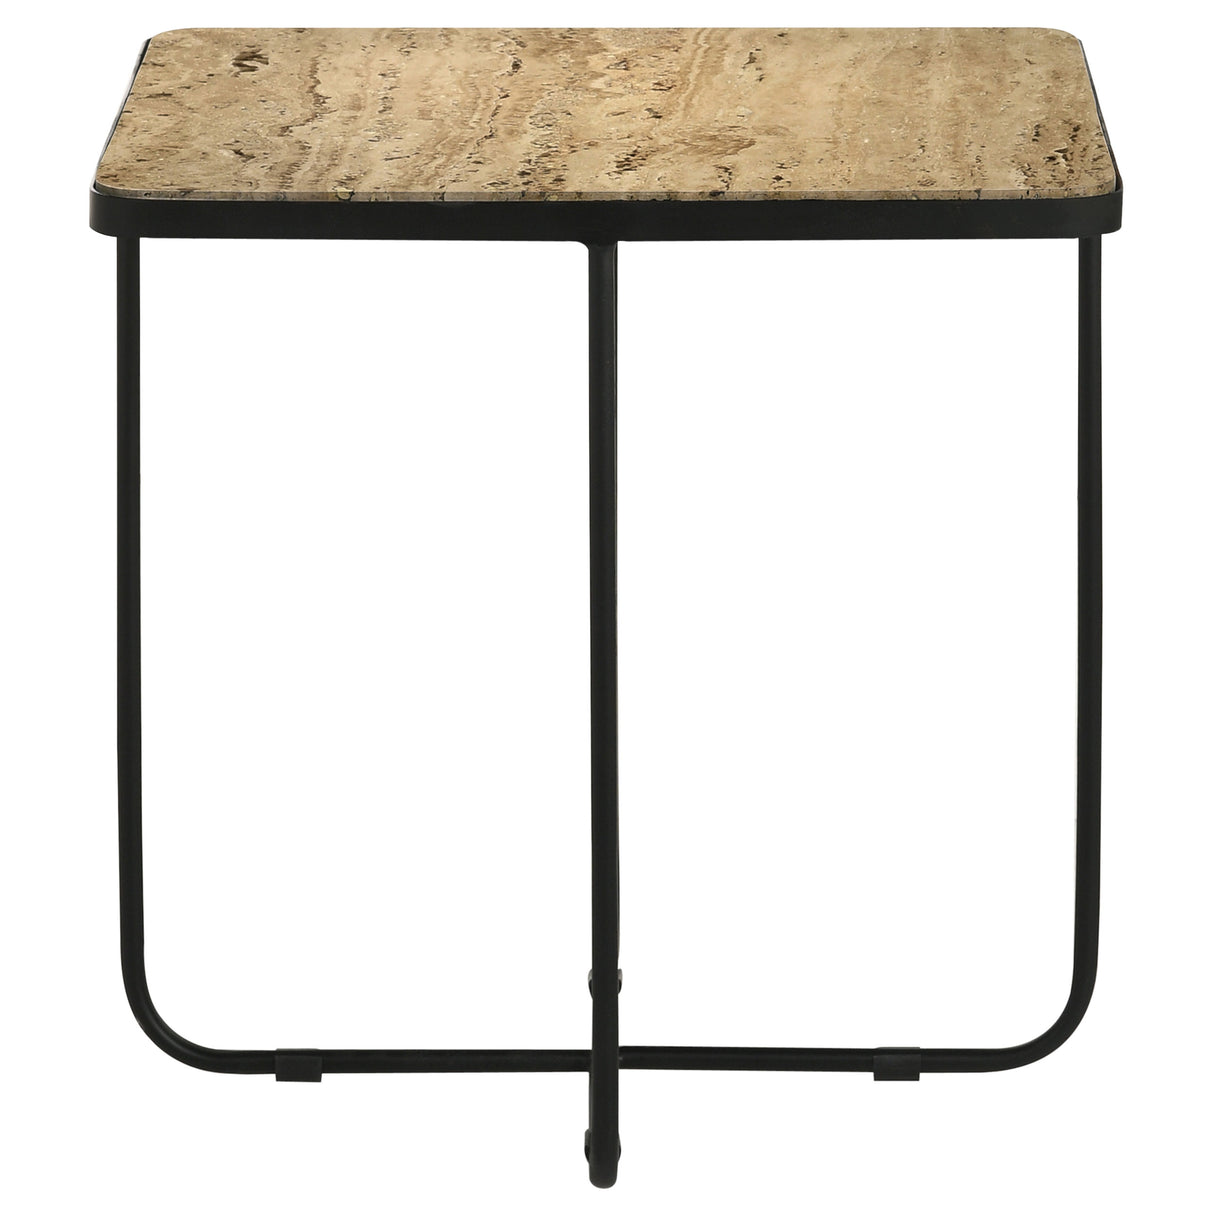 Side Table - Elyna Square Accent Table Travertine and Black